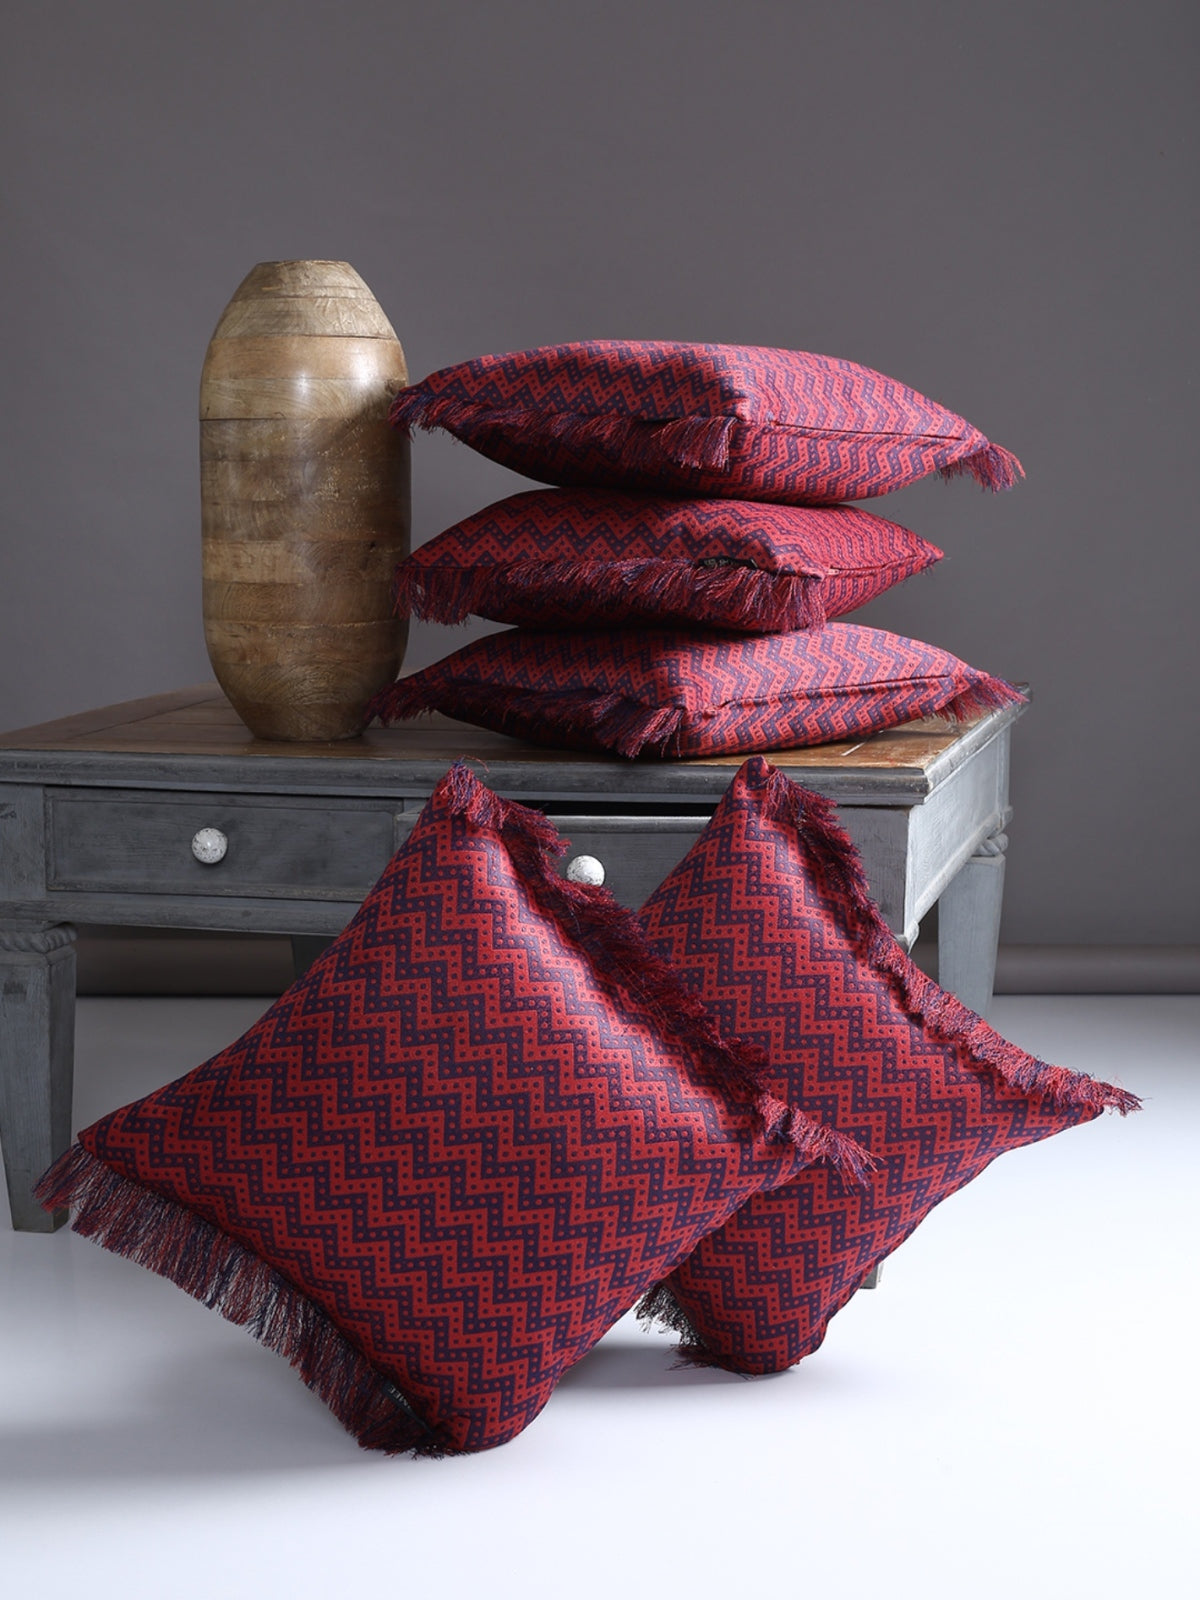 Soft Polyester Textured Zig-Zag Designer Cushion Covers 16 inch x 16 inch Set of 5 - Maroon & Navy Blue